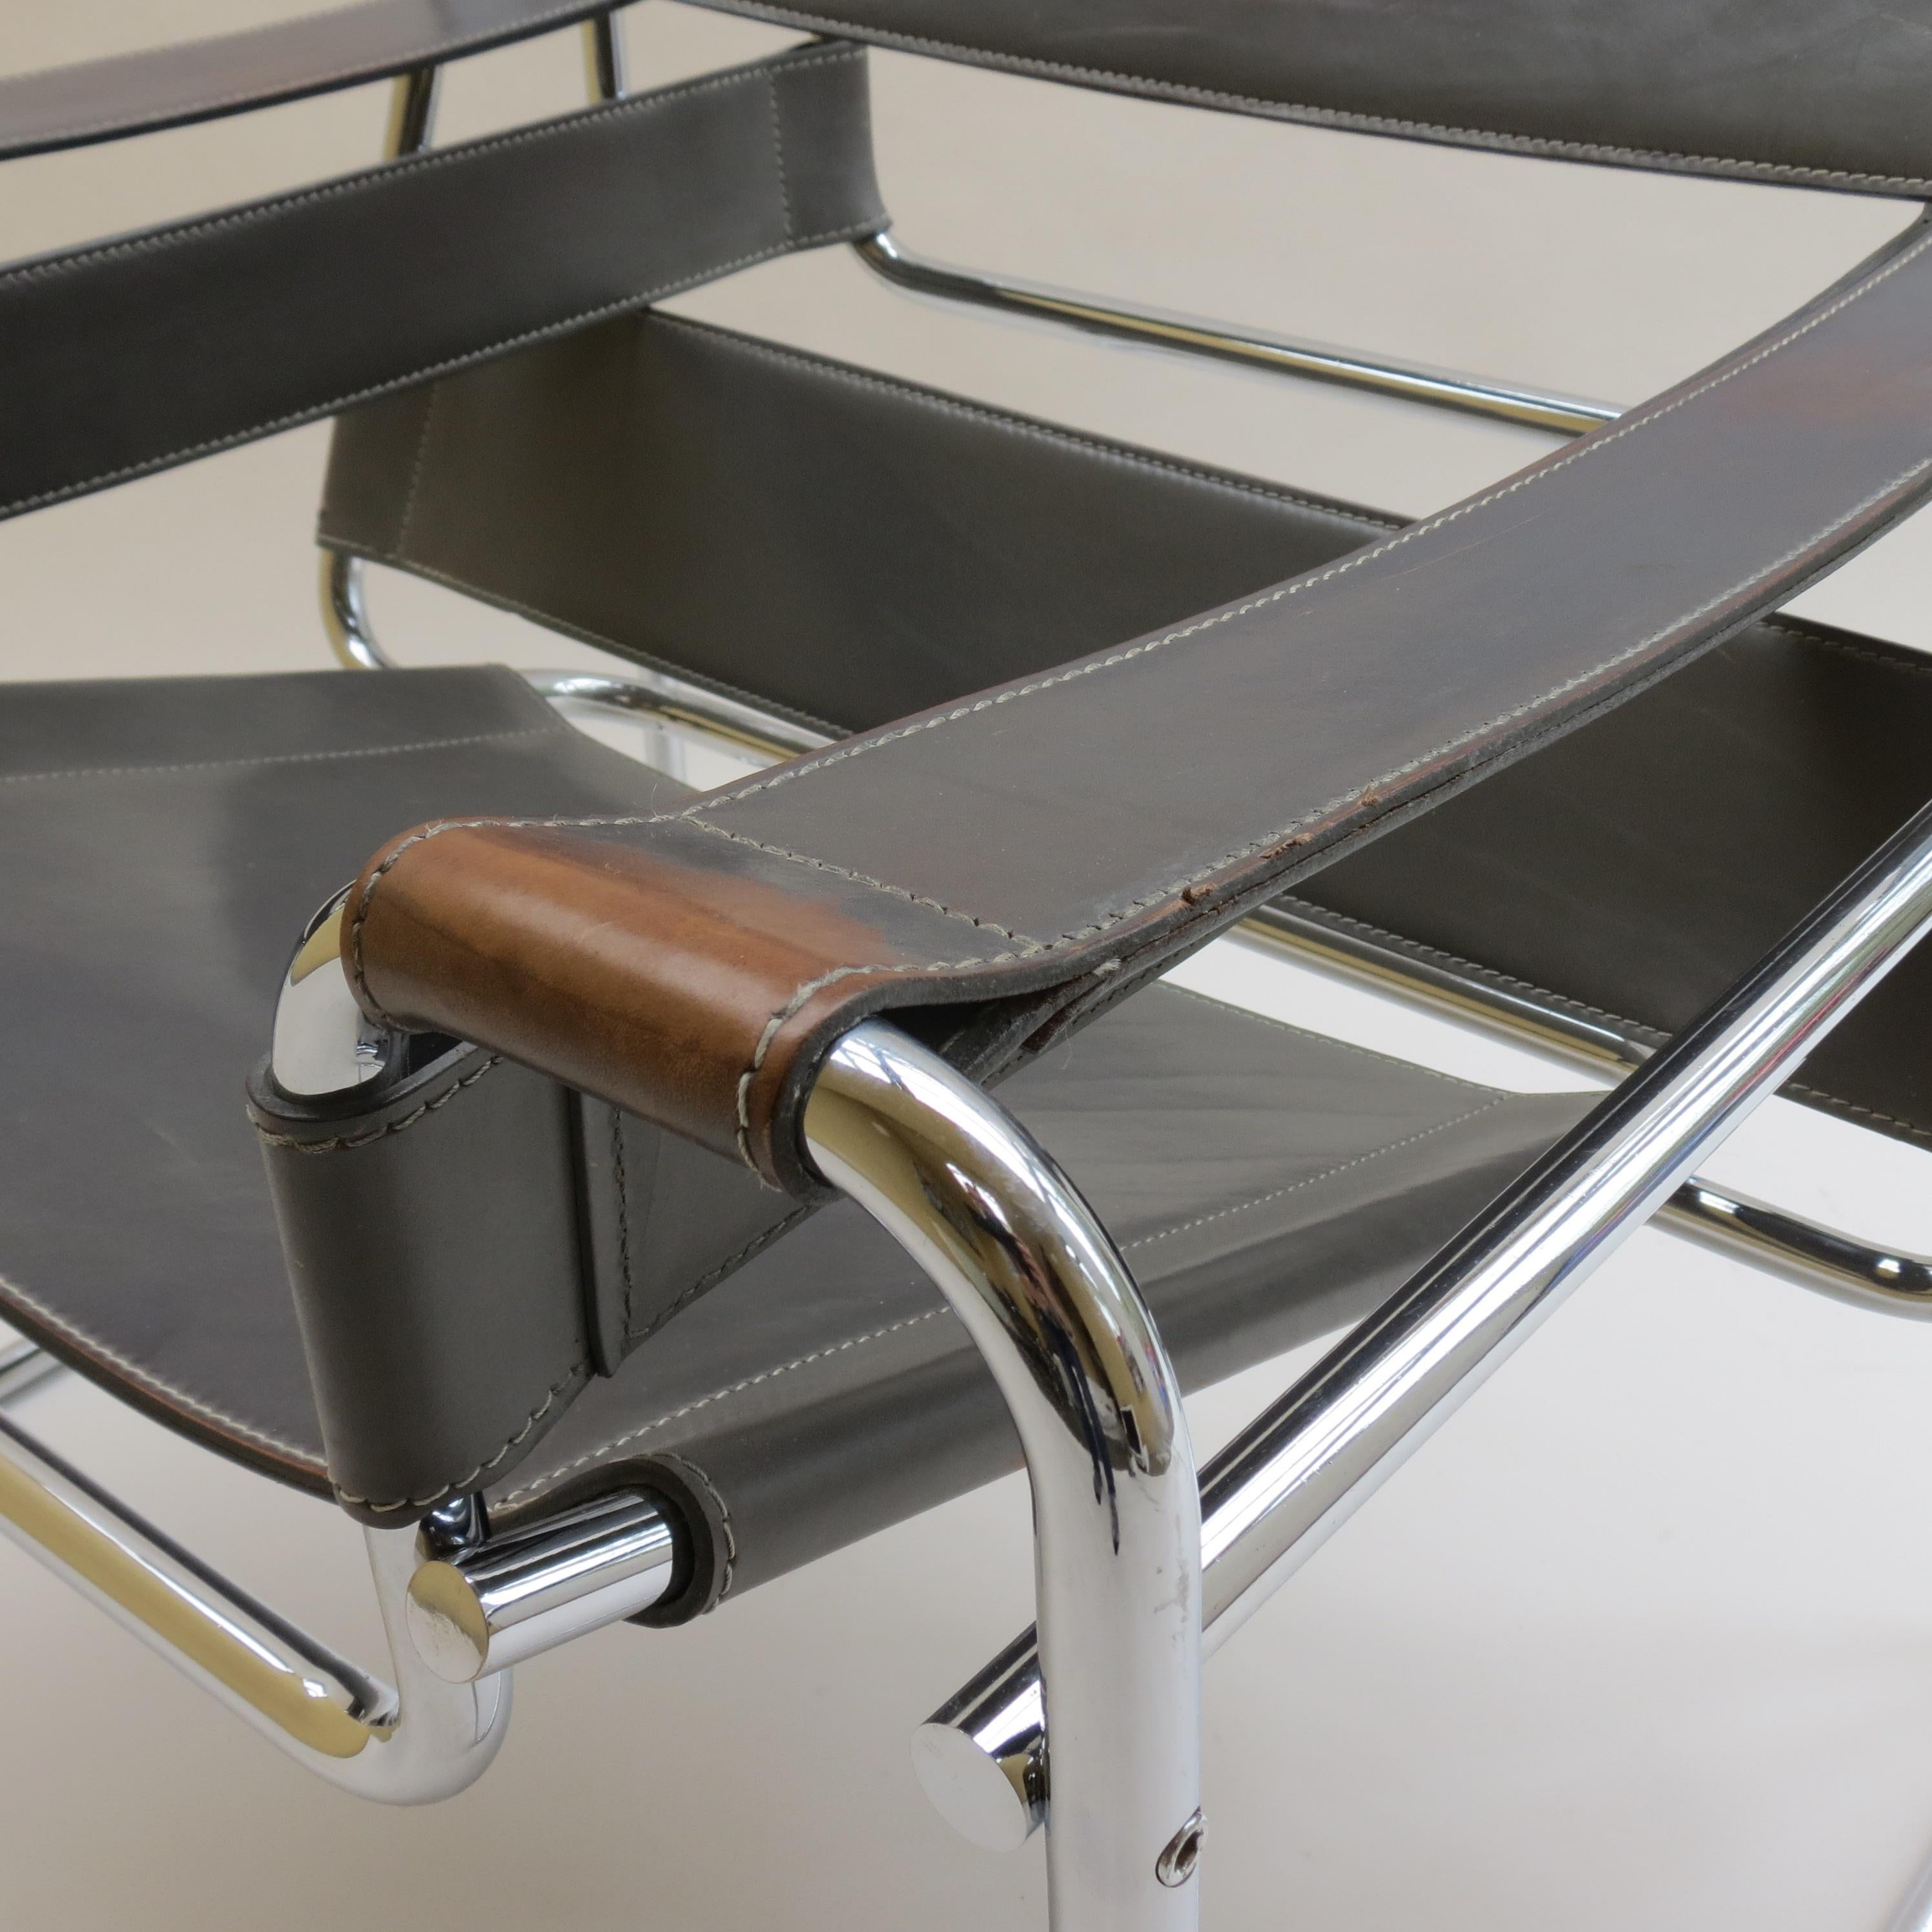 1980s Grey Bauhaus Wassily Chair by Marcel Breuer for Knoll 2 Available B 9